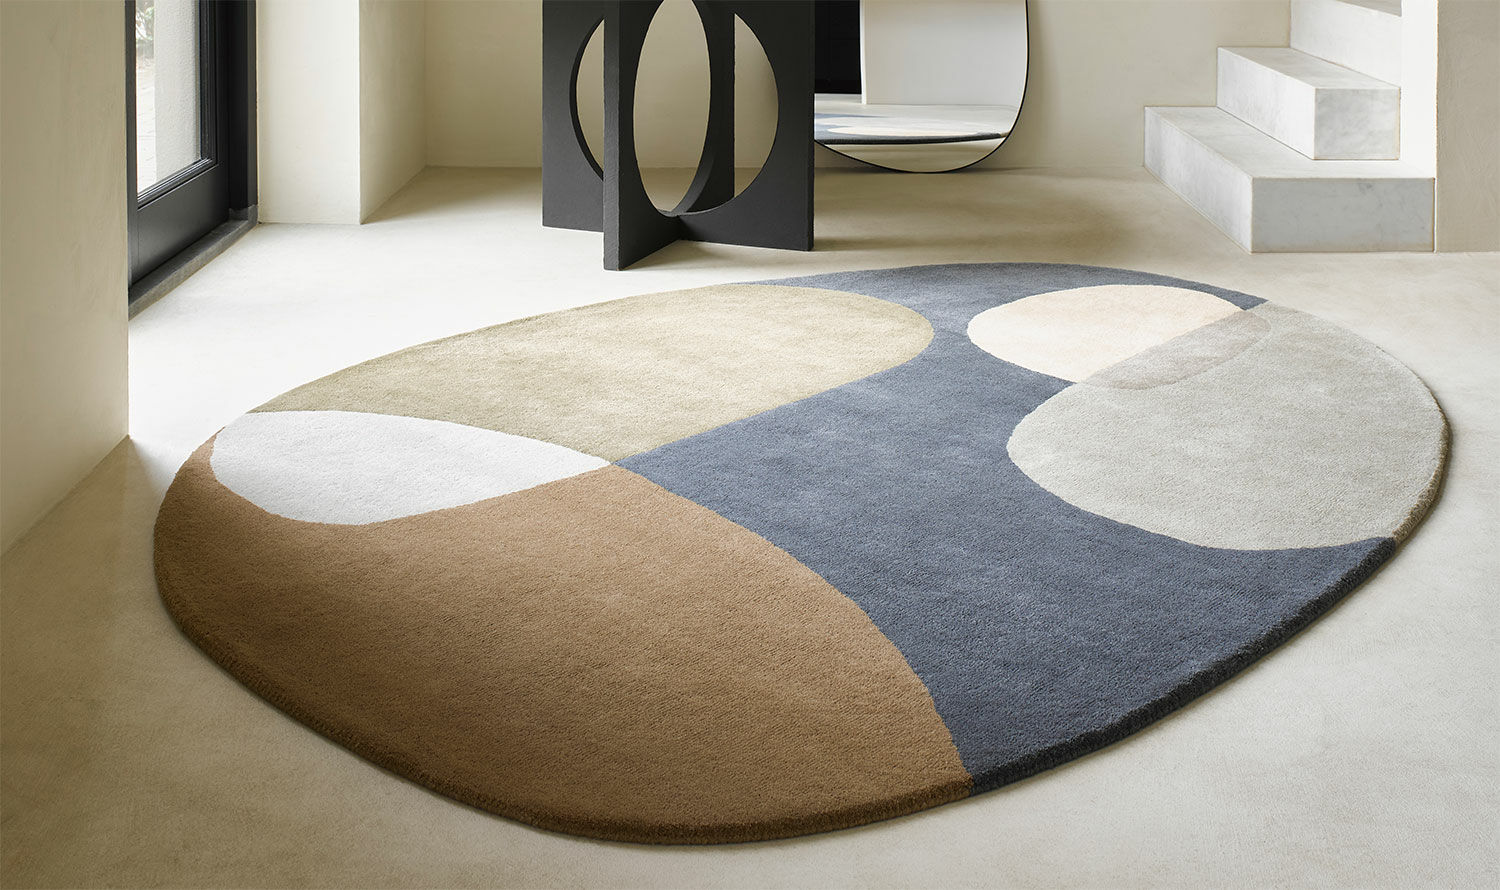 Carpet "Shades of Beige" (oval, 140 x 200 cm)